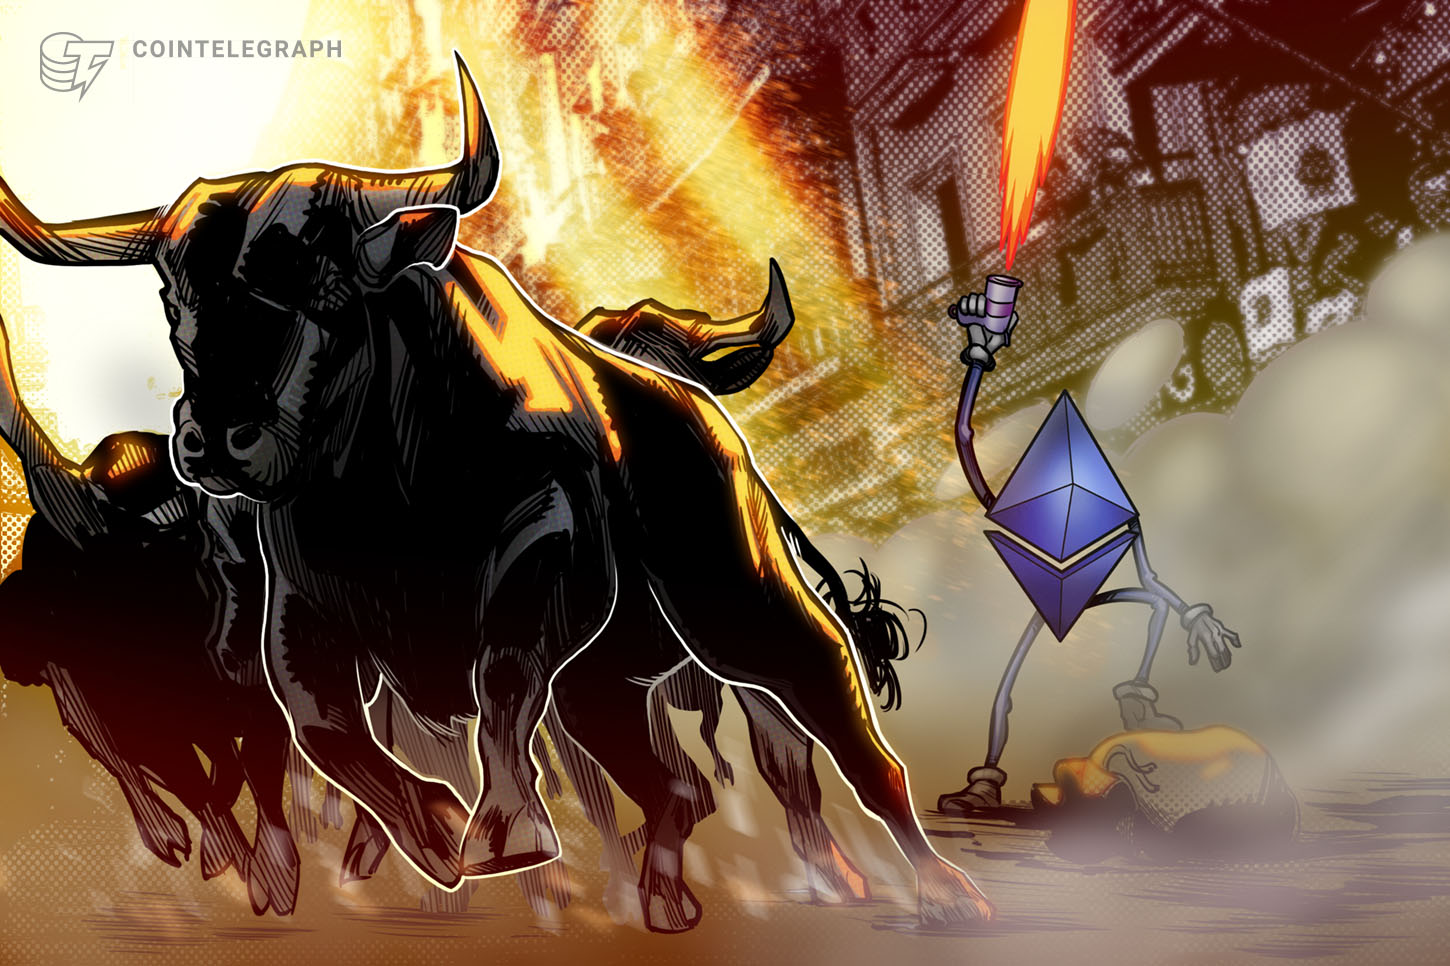 Did Ethereum simply backside vs. Bitcoin? That is the final massive hurdle earlier than $600